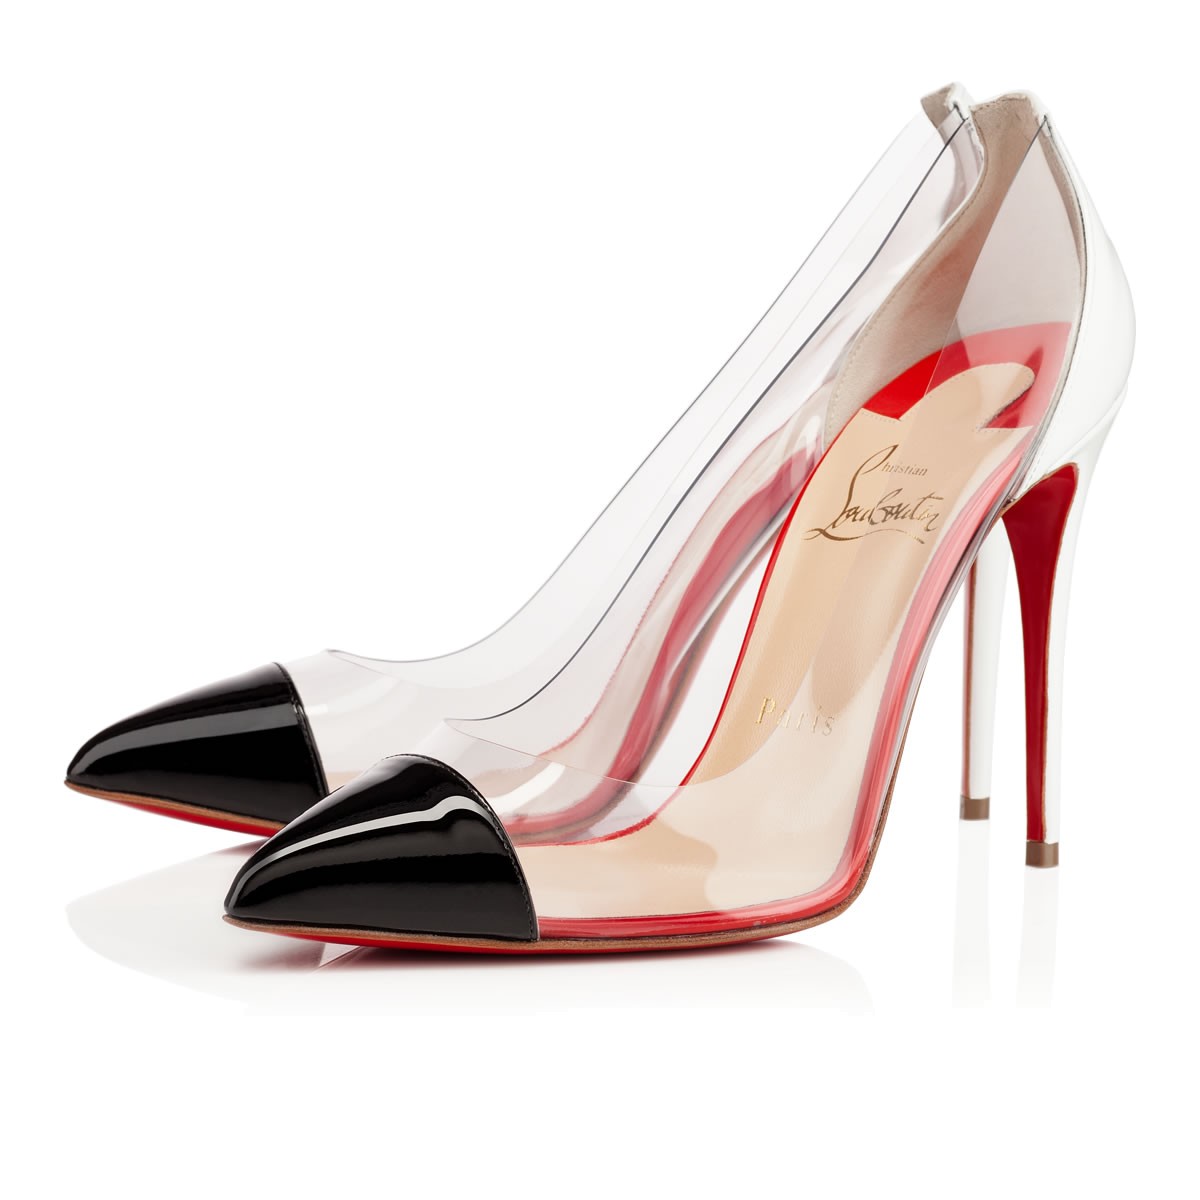 christian louboutins replicas - Compare Prices on Red Bottom Shoes- Online Shopping/Buy Low Price ...